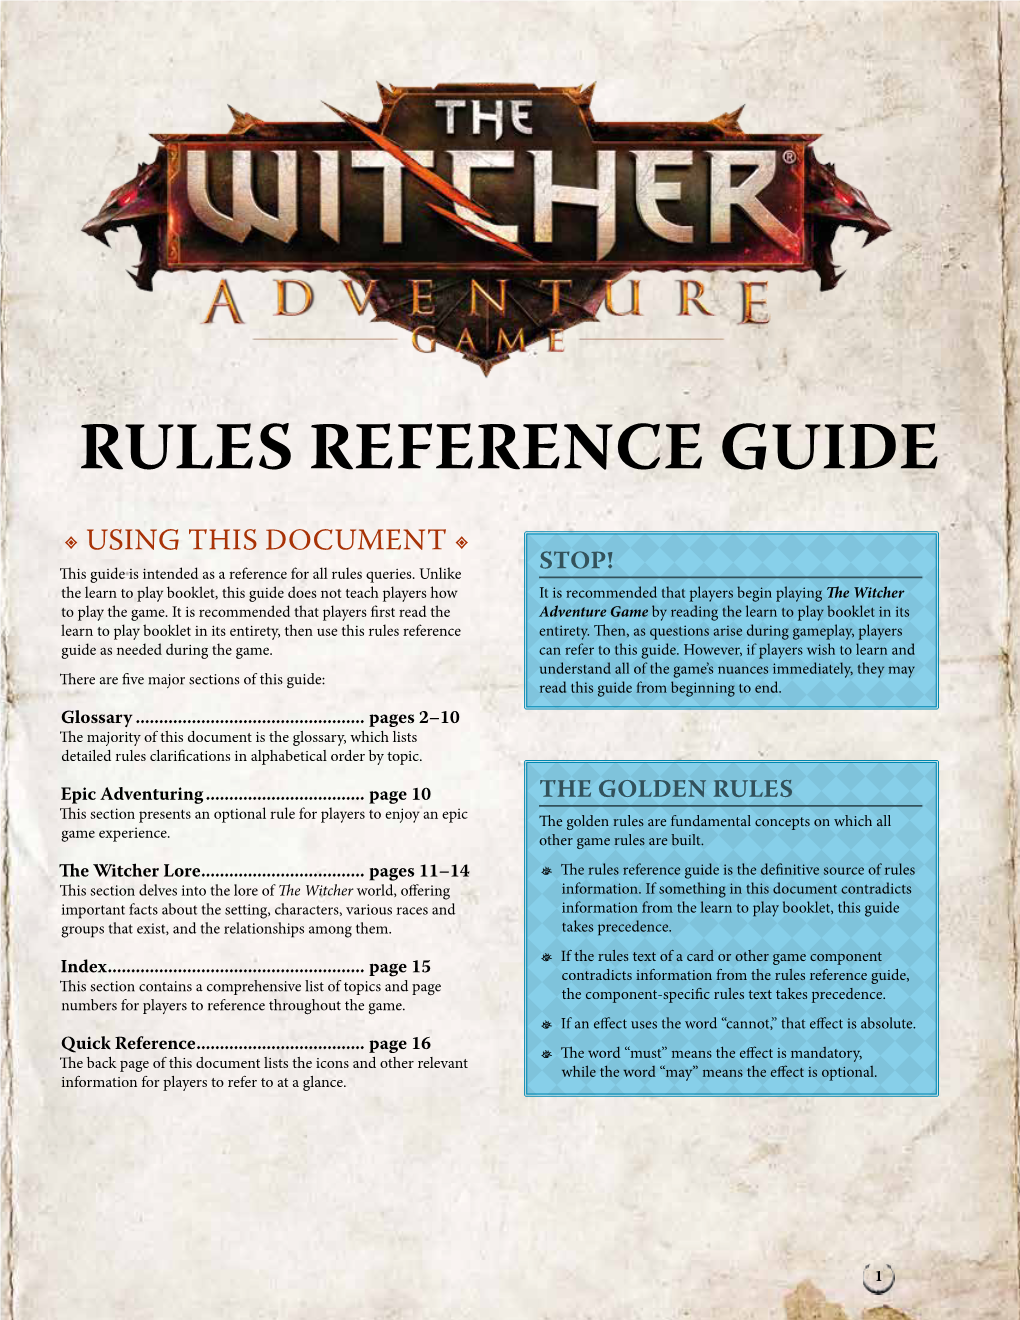 RULES REFERENCE GUIDE D USING THIS DOCUMENT D This Guide Is Intended As a Reference for All Rules Queries